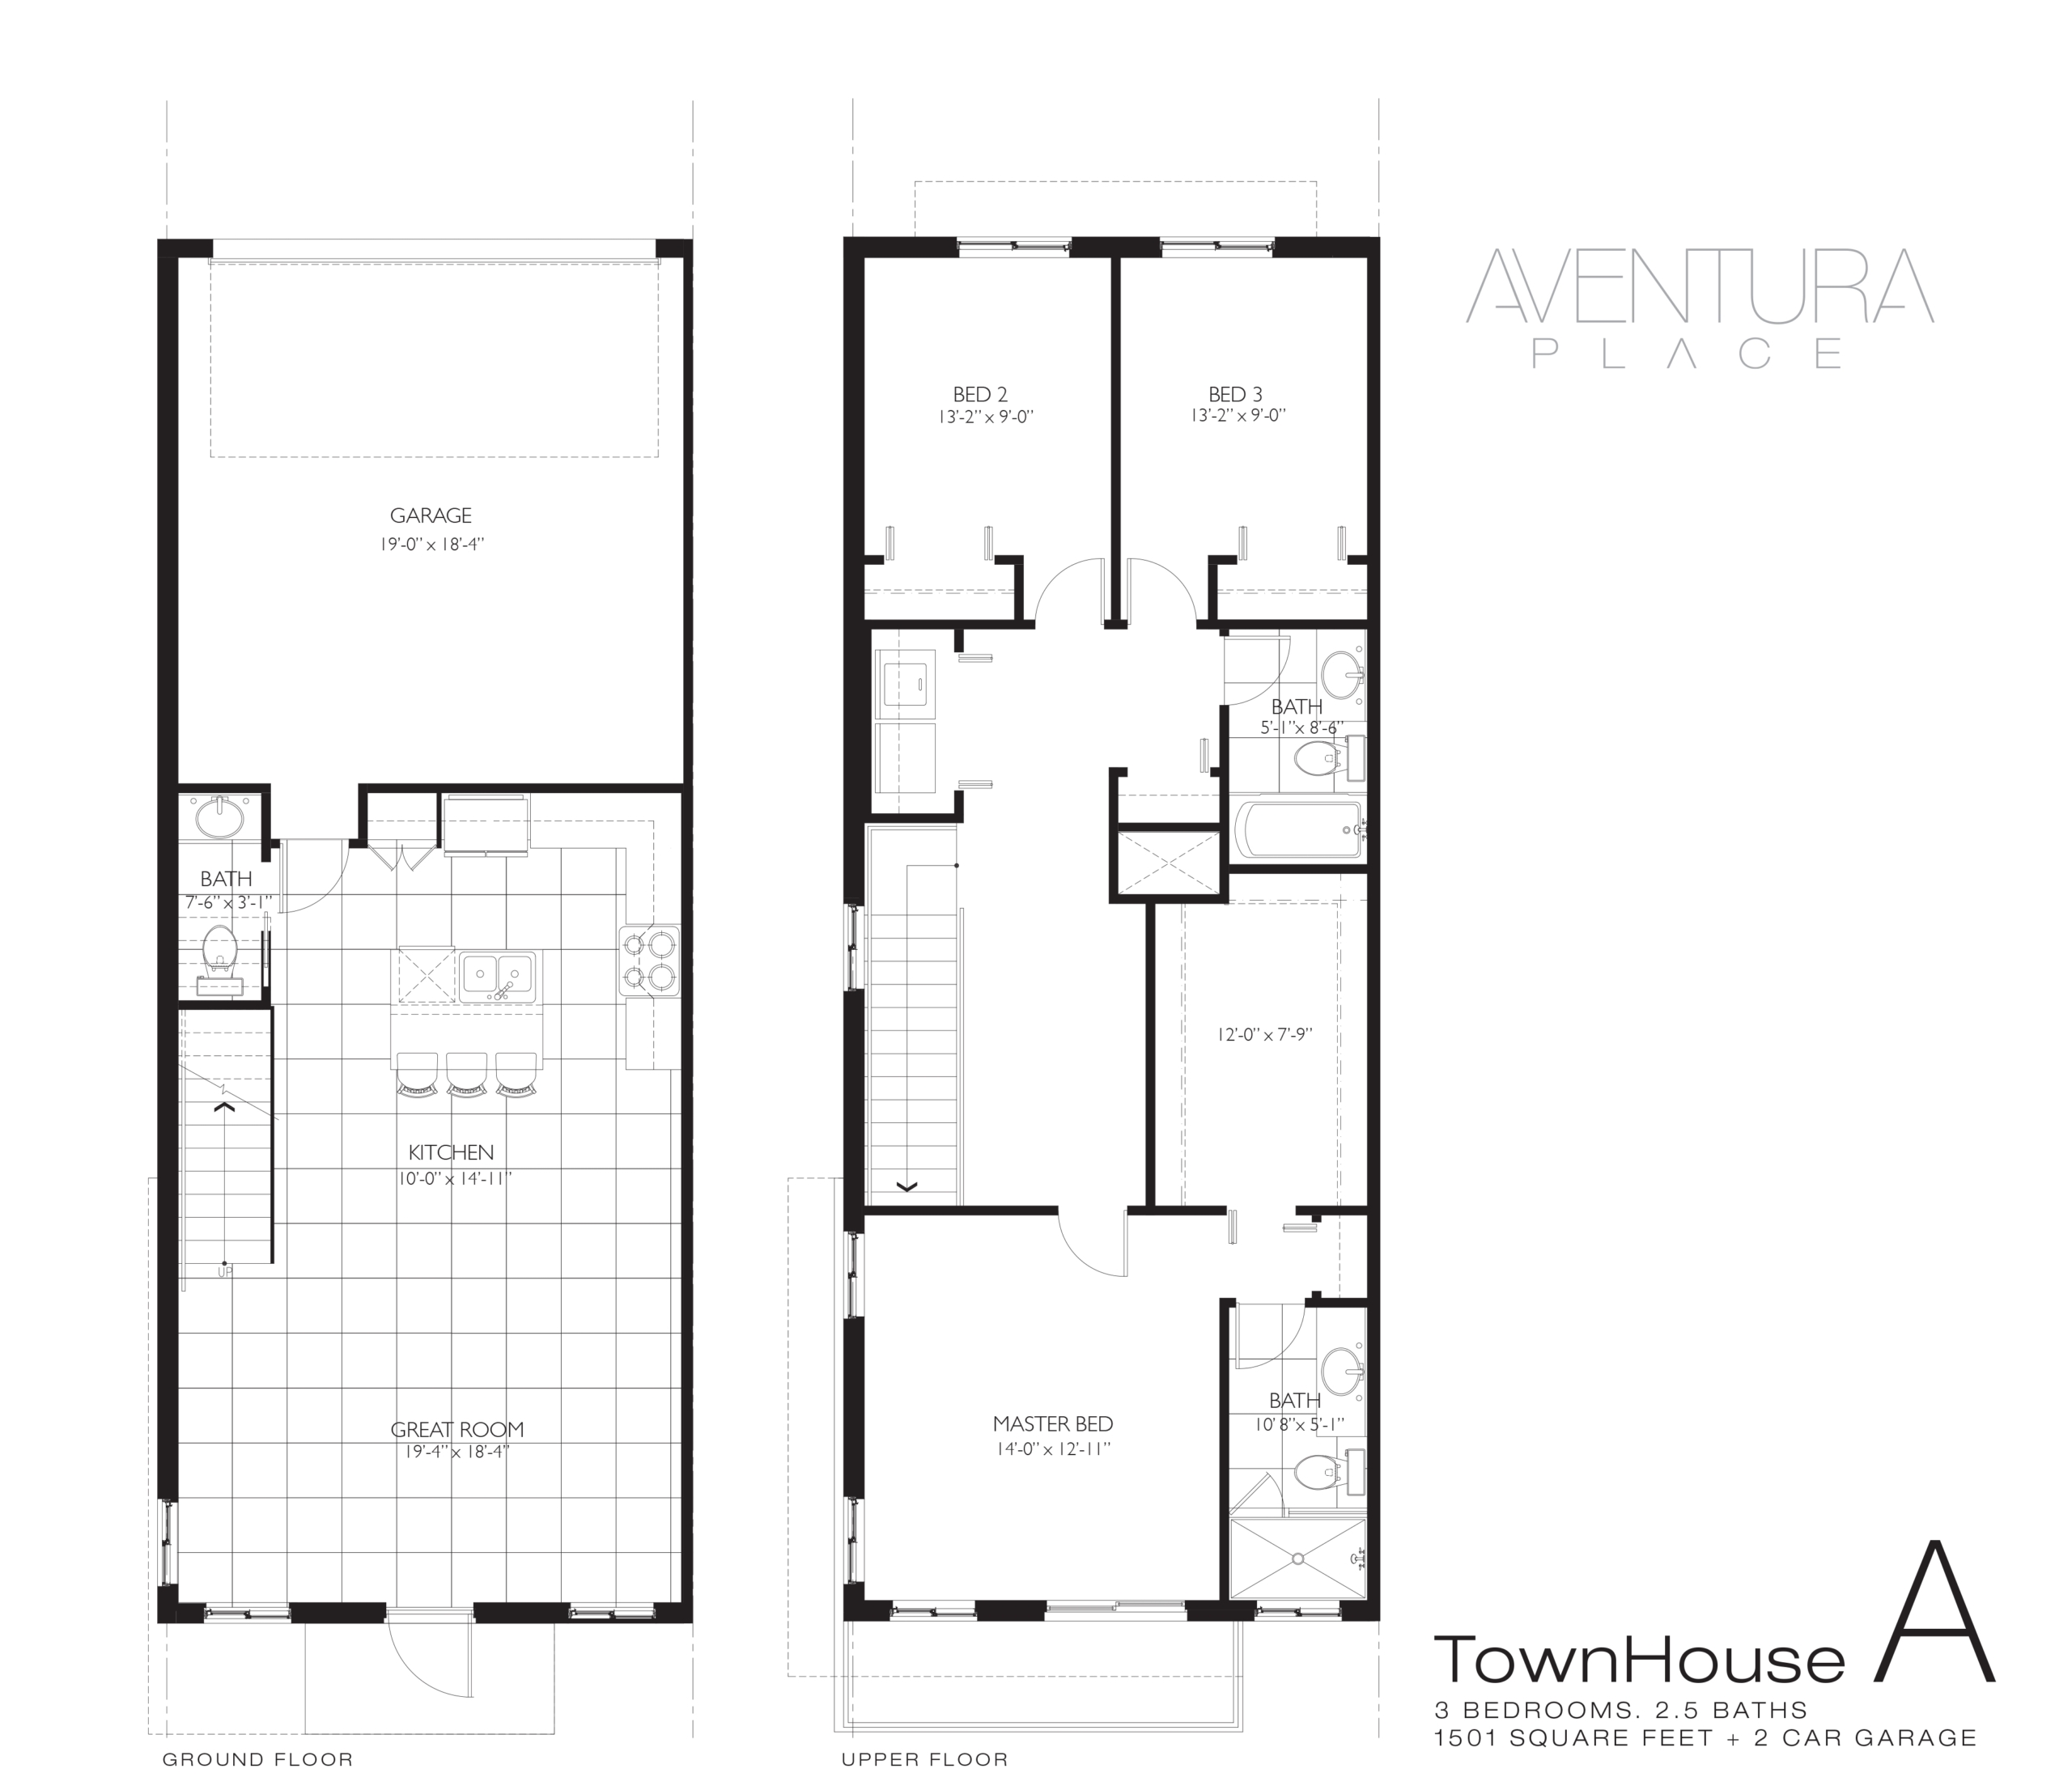 Aventura Place Townhouse A